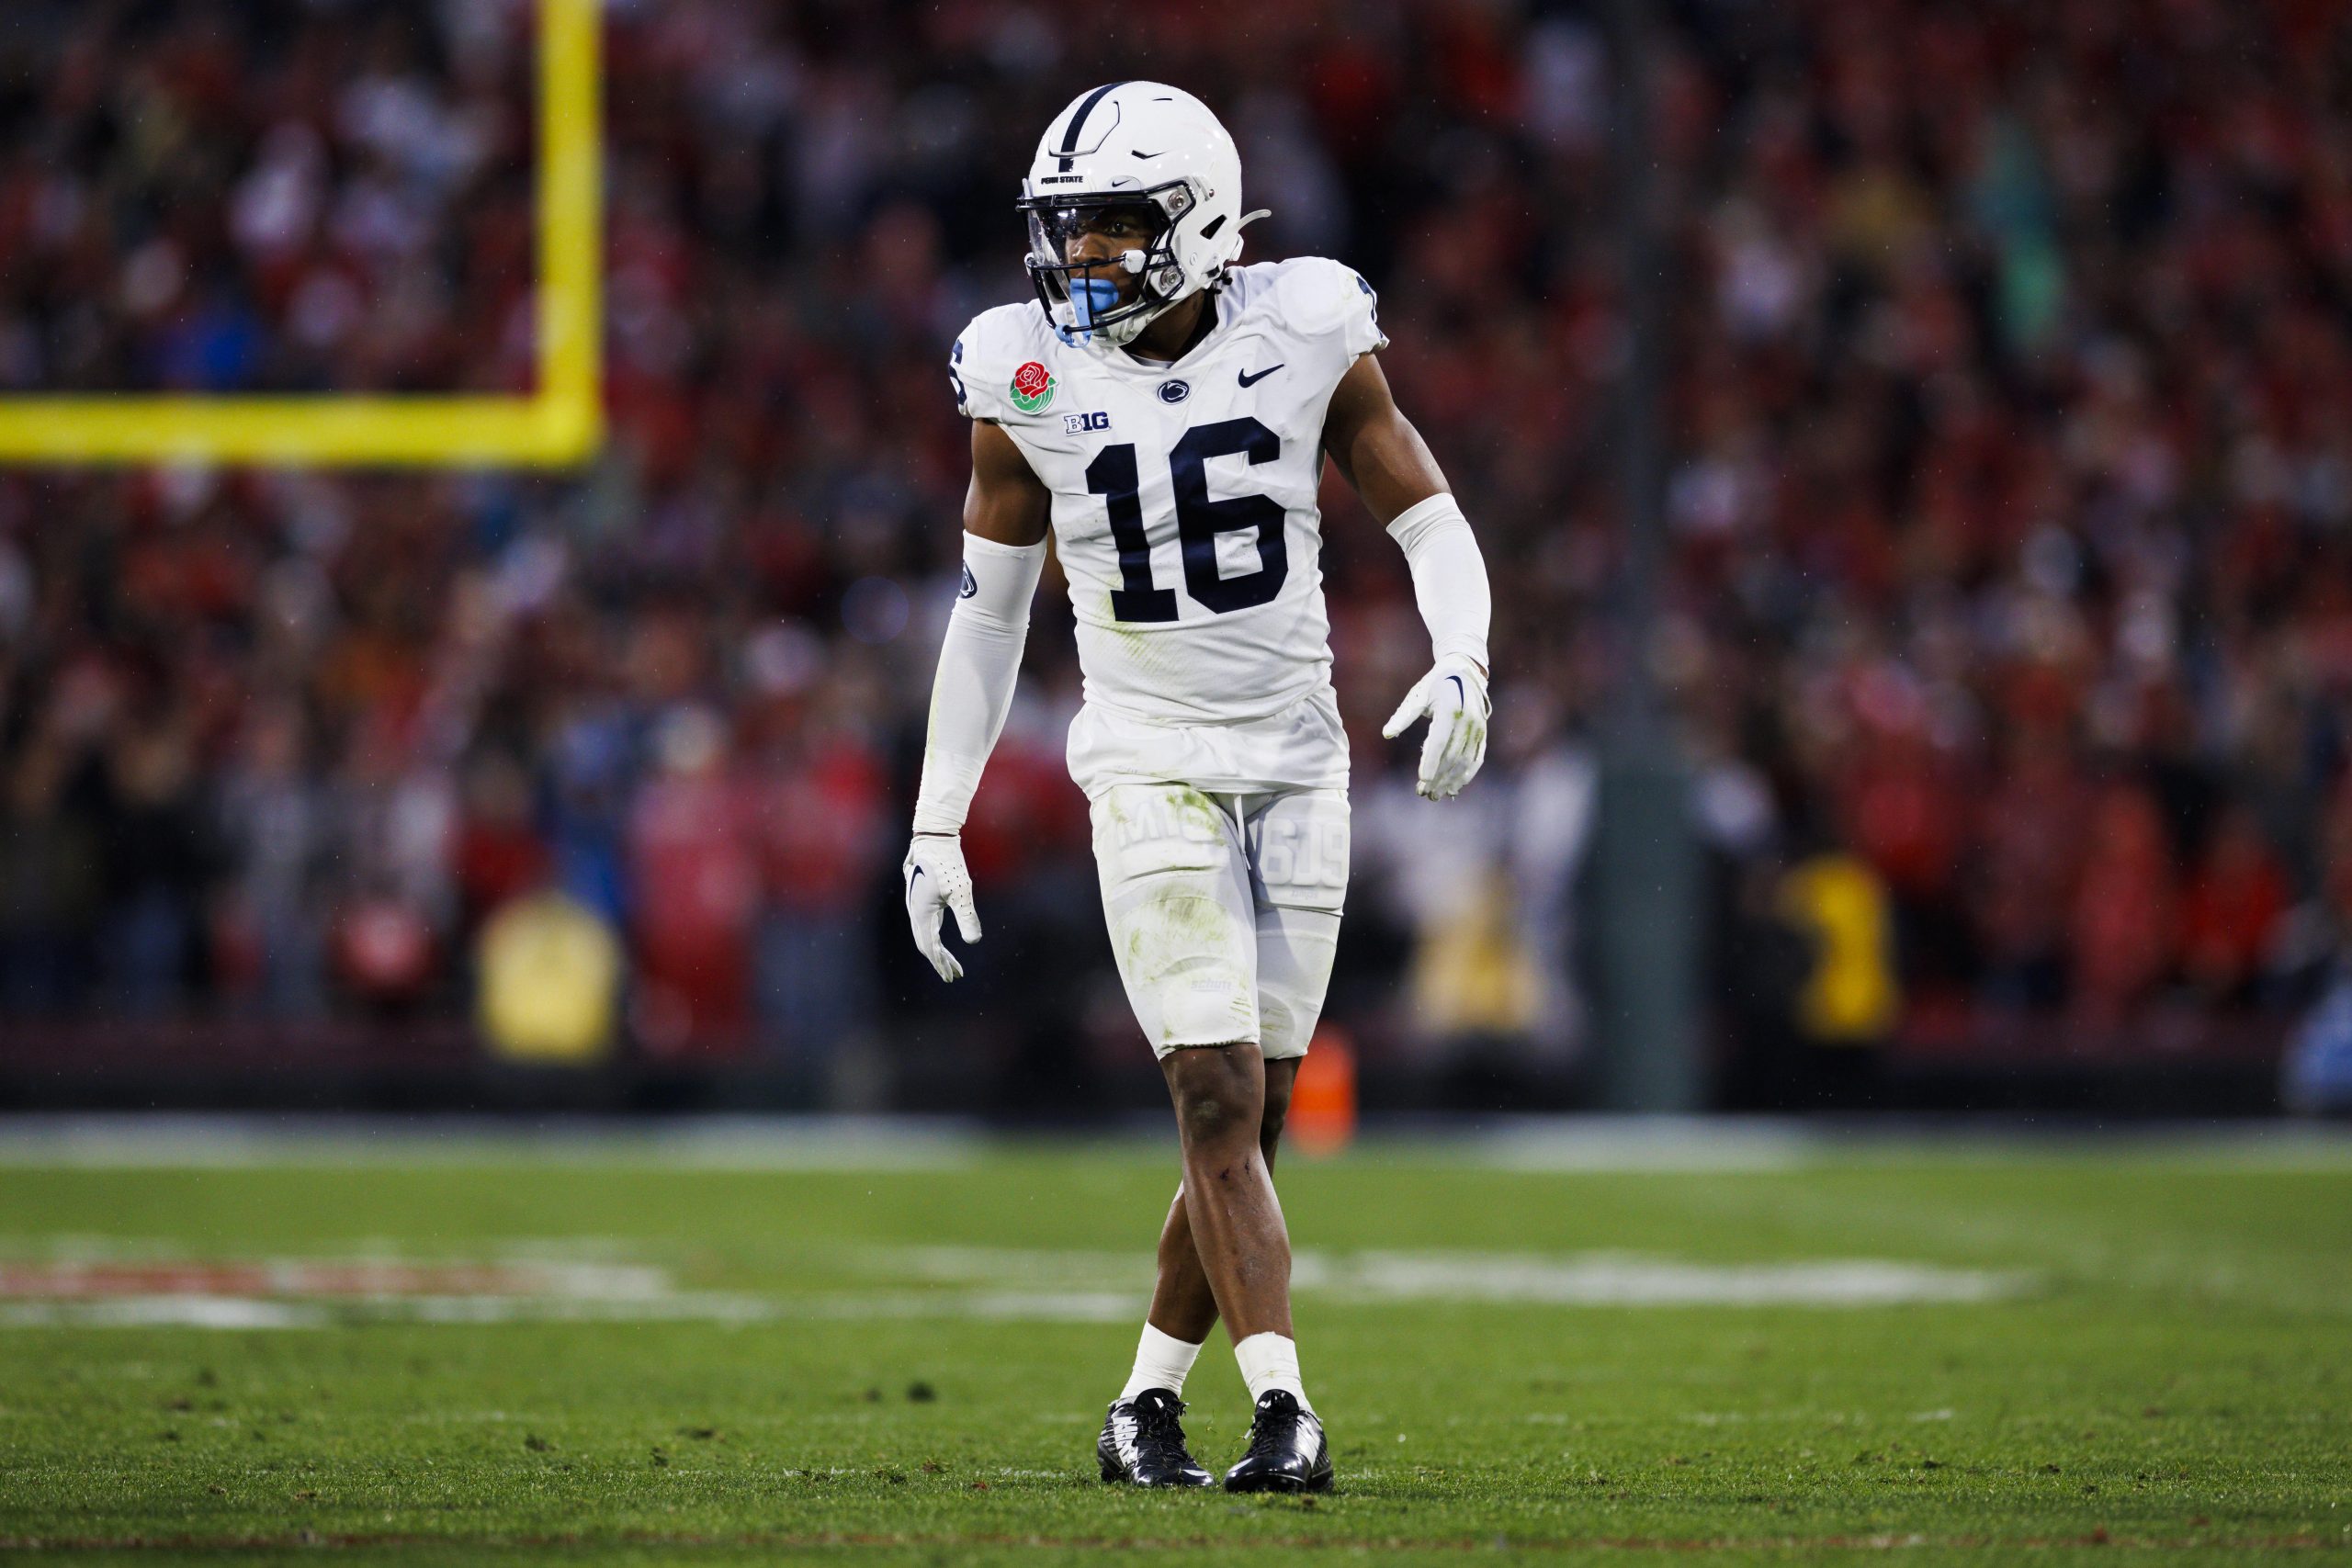 Penn State Nittany Lions safety Ji'Ayir Brown (16) defends during the Rose Bowl game between the Pe...